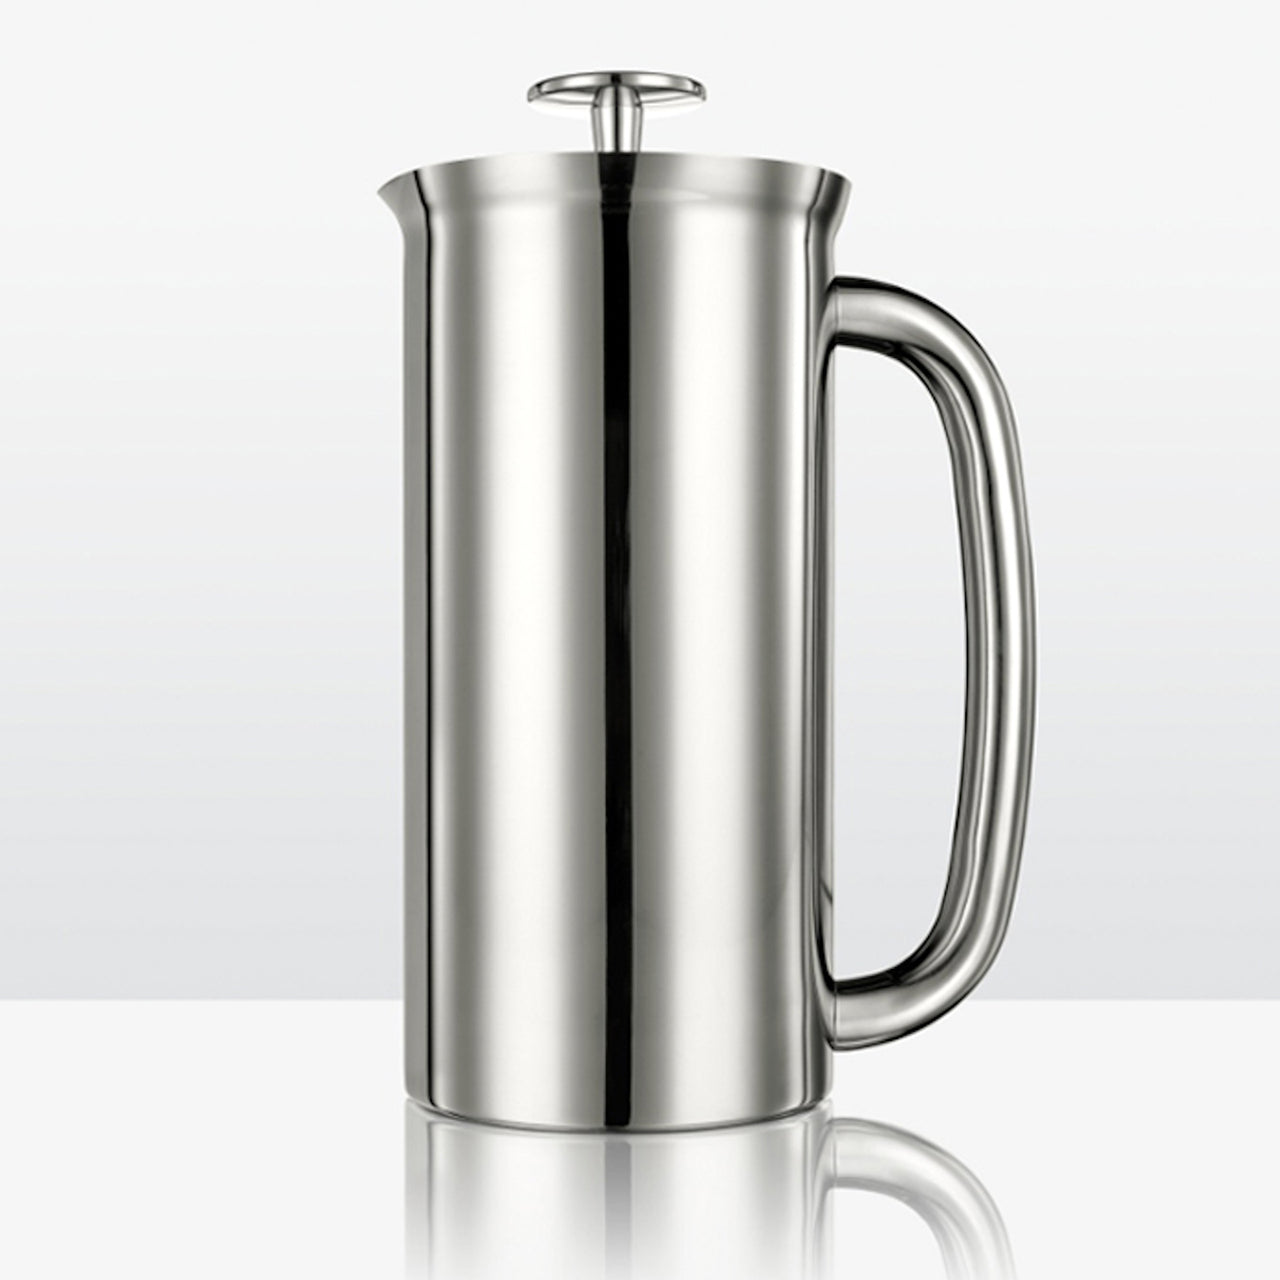 Espro P7 Cafetiere / Brushed Stainless Steel